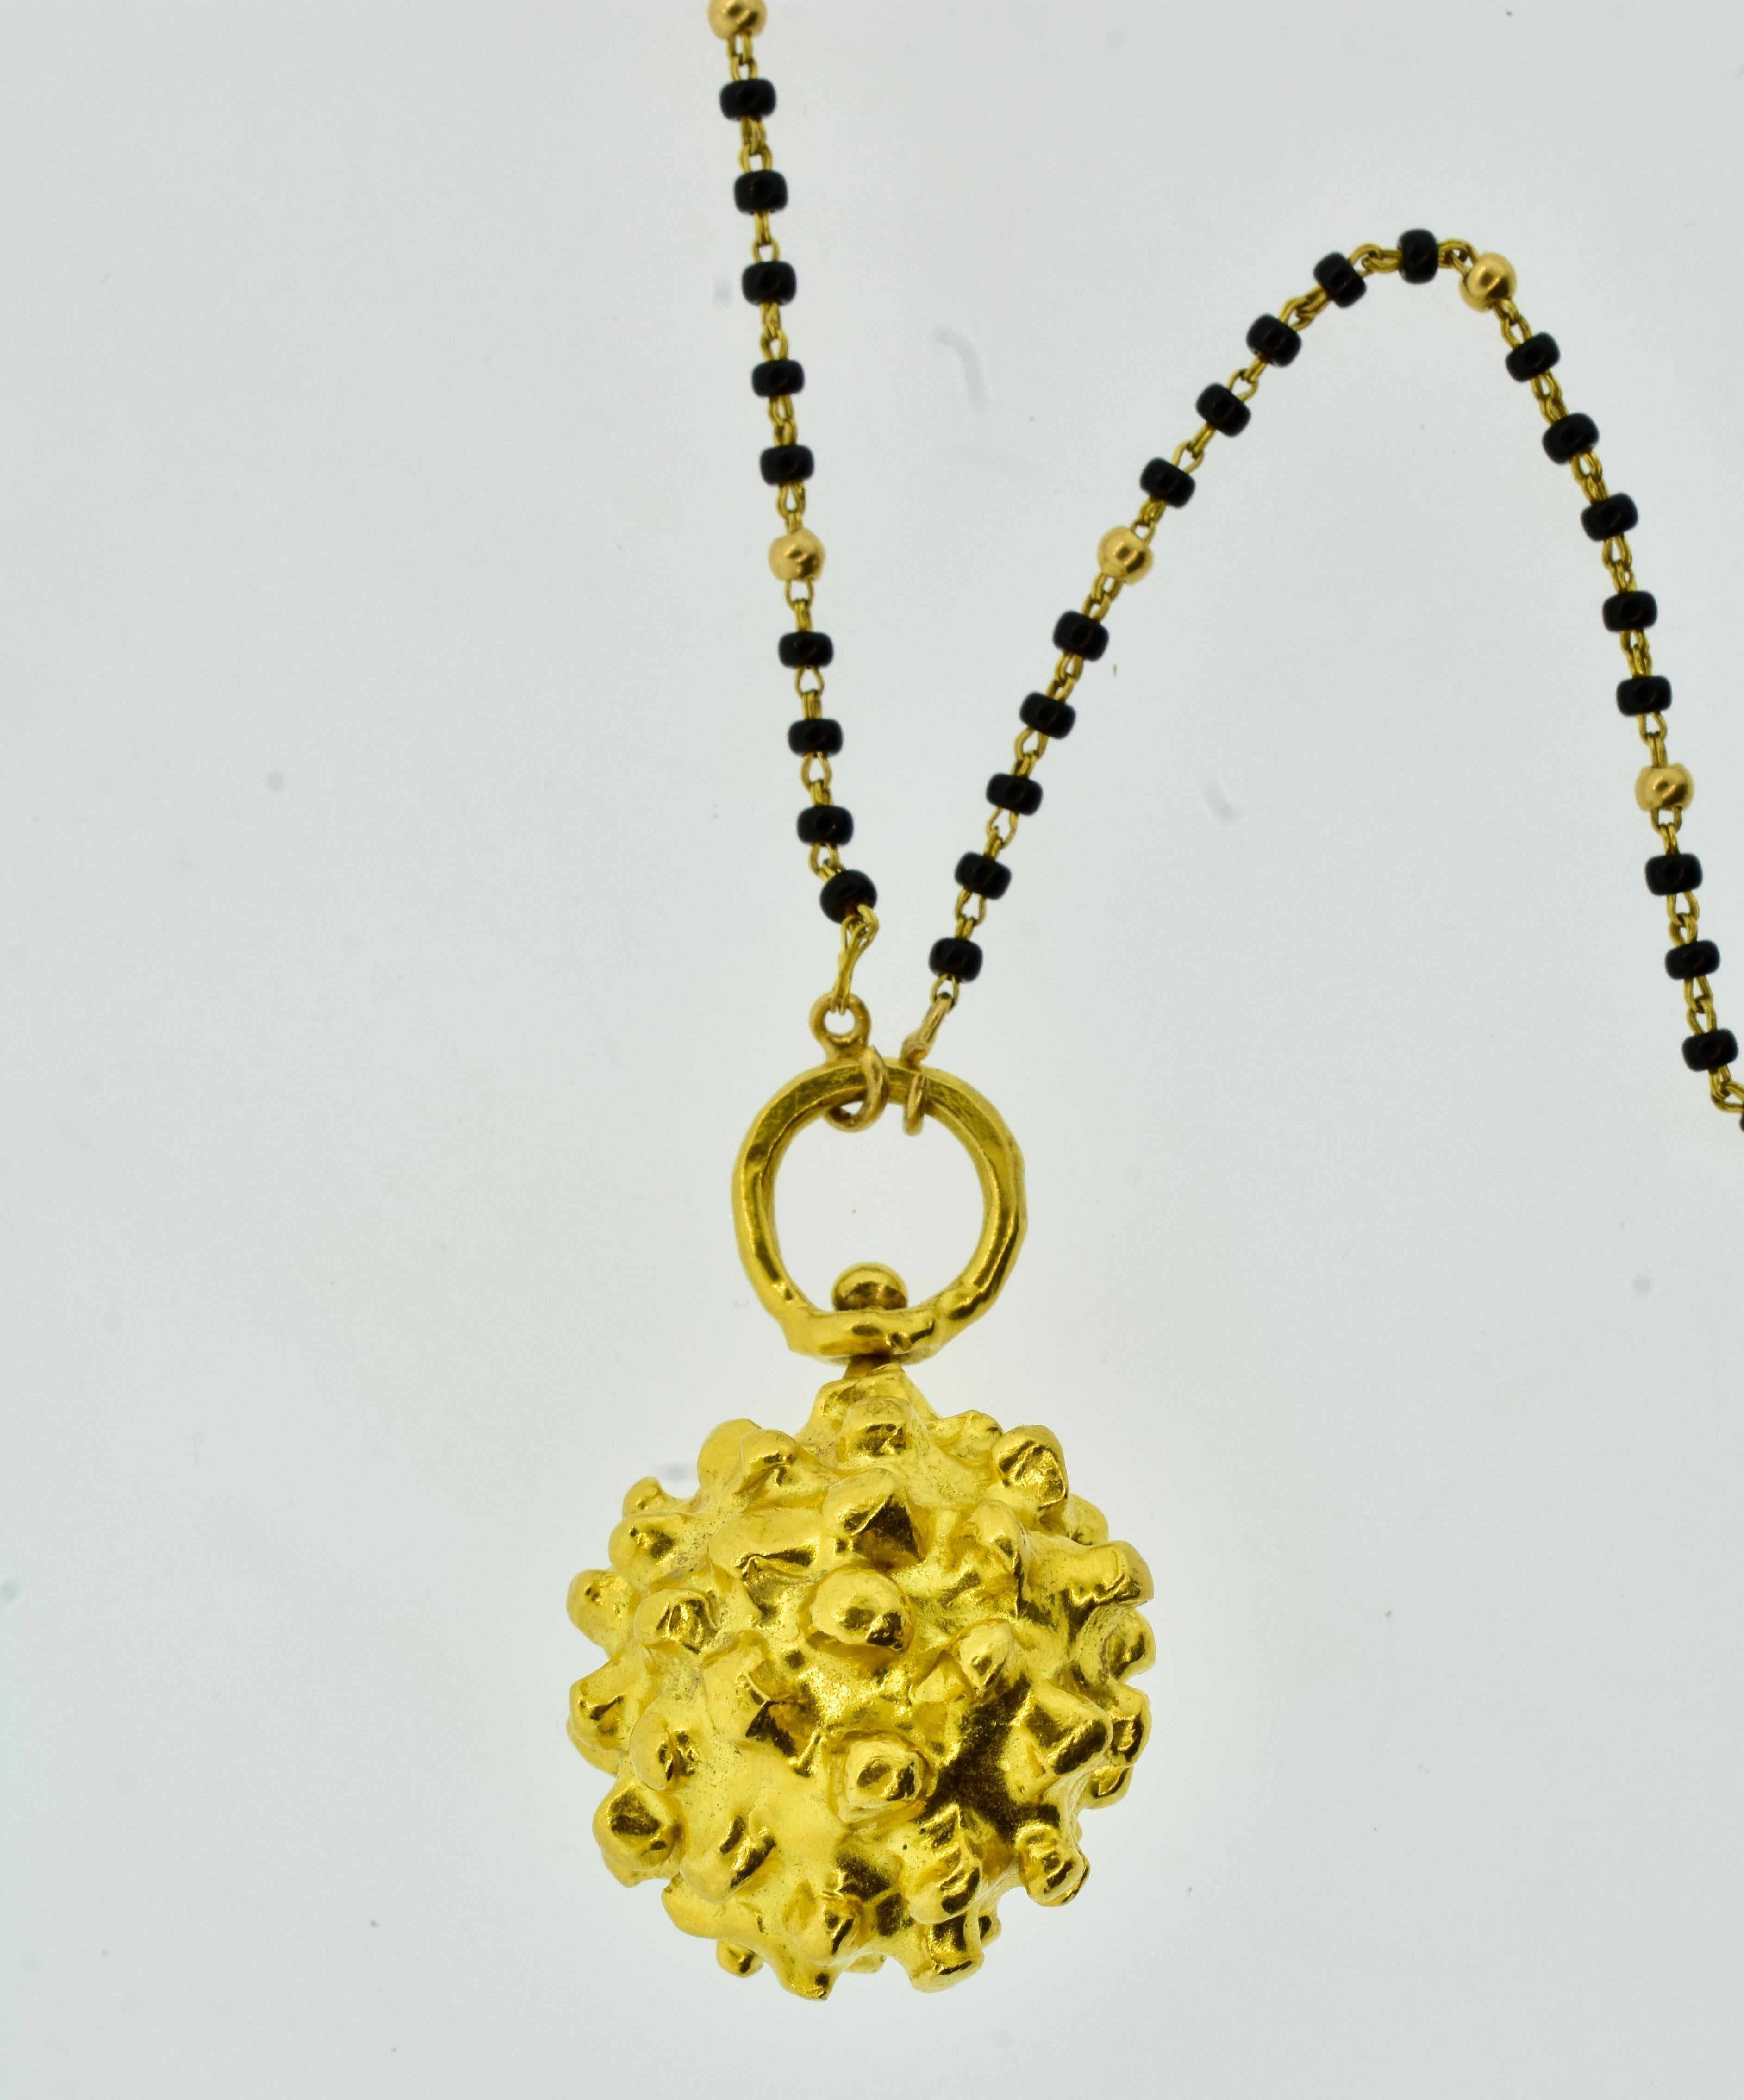 Jean Mahie Etruscan Large Ball Pendant in 22K Gold, French, c. 1990 For Sale 2